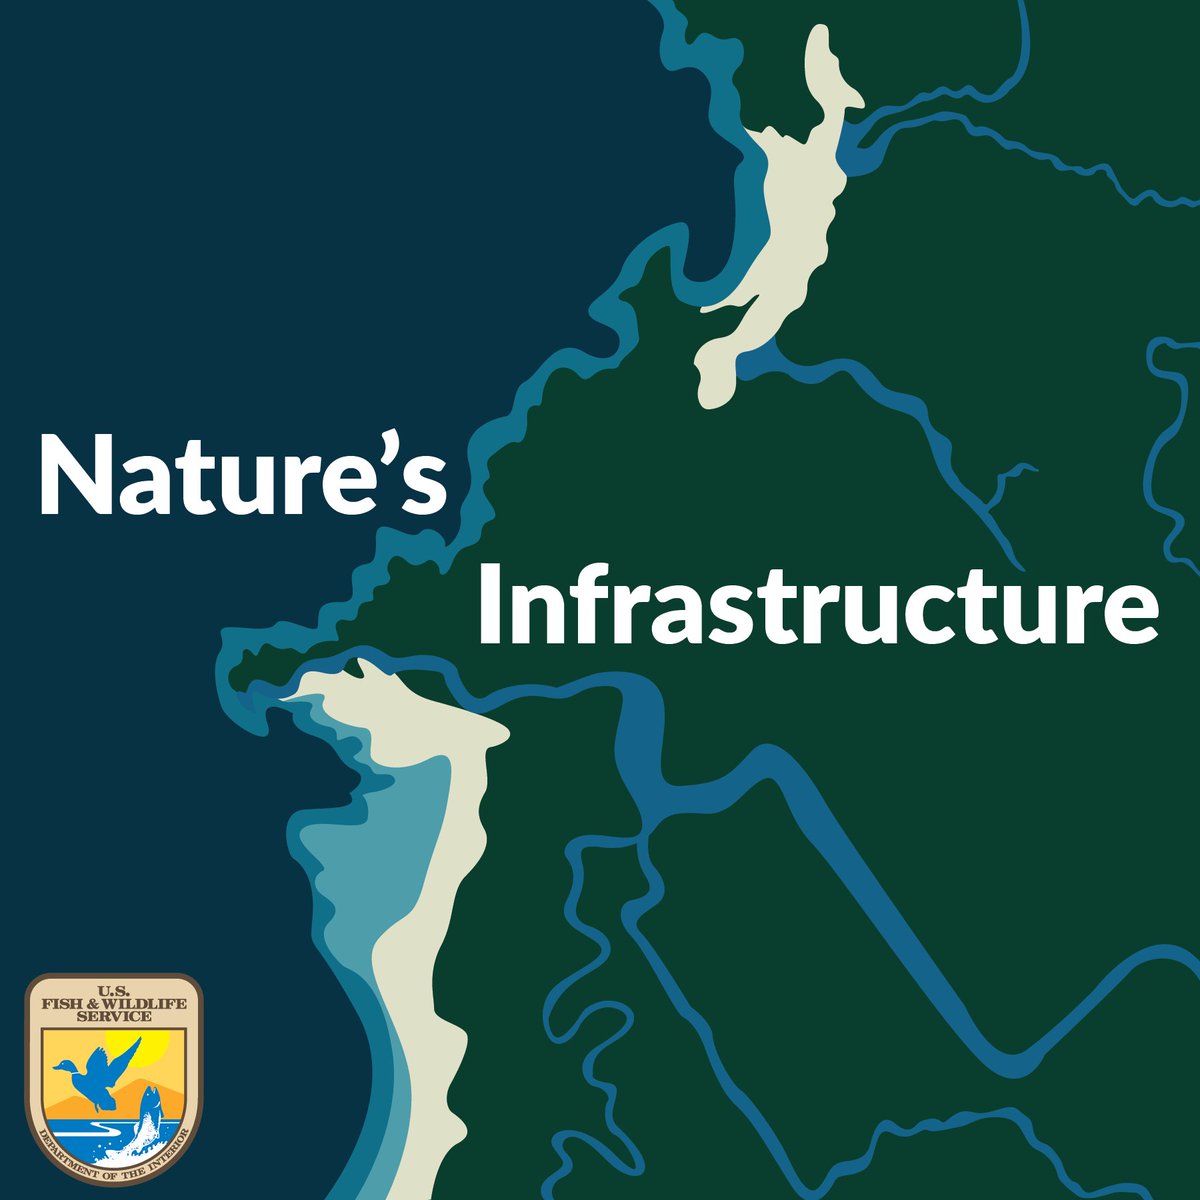 Check out some of the ways the BIL is benefitting species, ecosystems and communities in the 2023 Annual Report and be sure to tune into the new Nature’s Infrastructure podcast, featuring Director Williams as the first guest!: ow.ly/KbM150Ra1k8